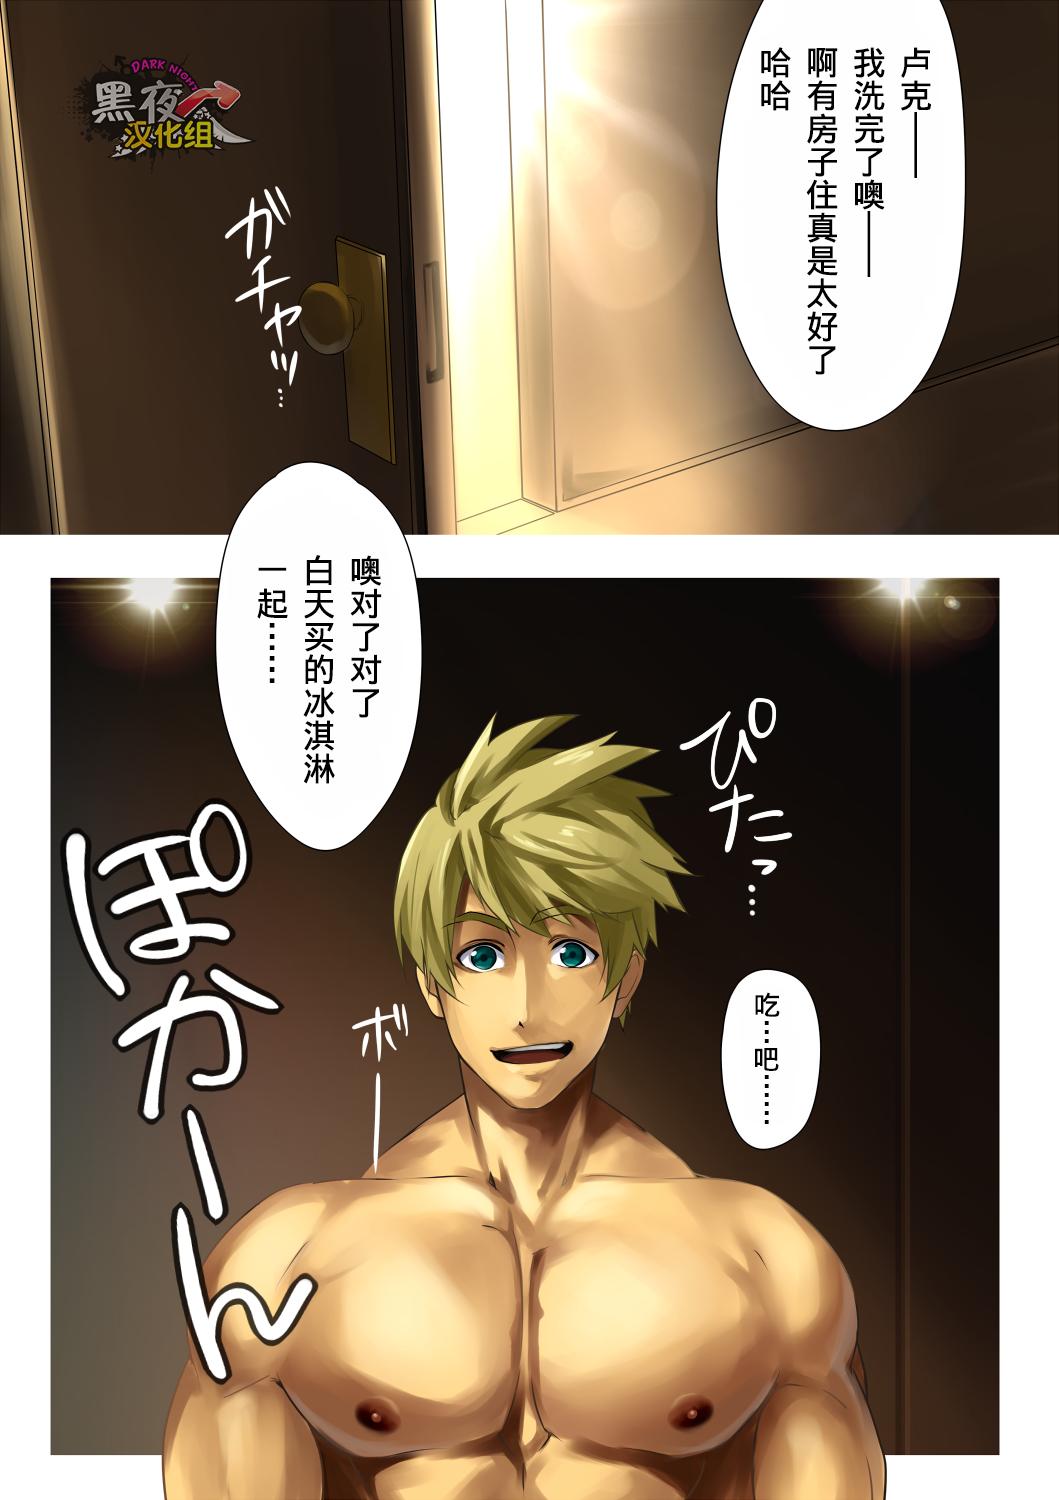 Gangbang malemilk - Tales of the abyss Hot Whores - Page 7